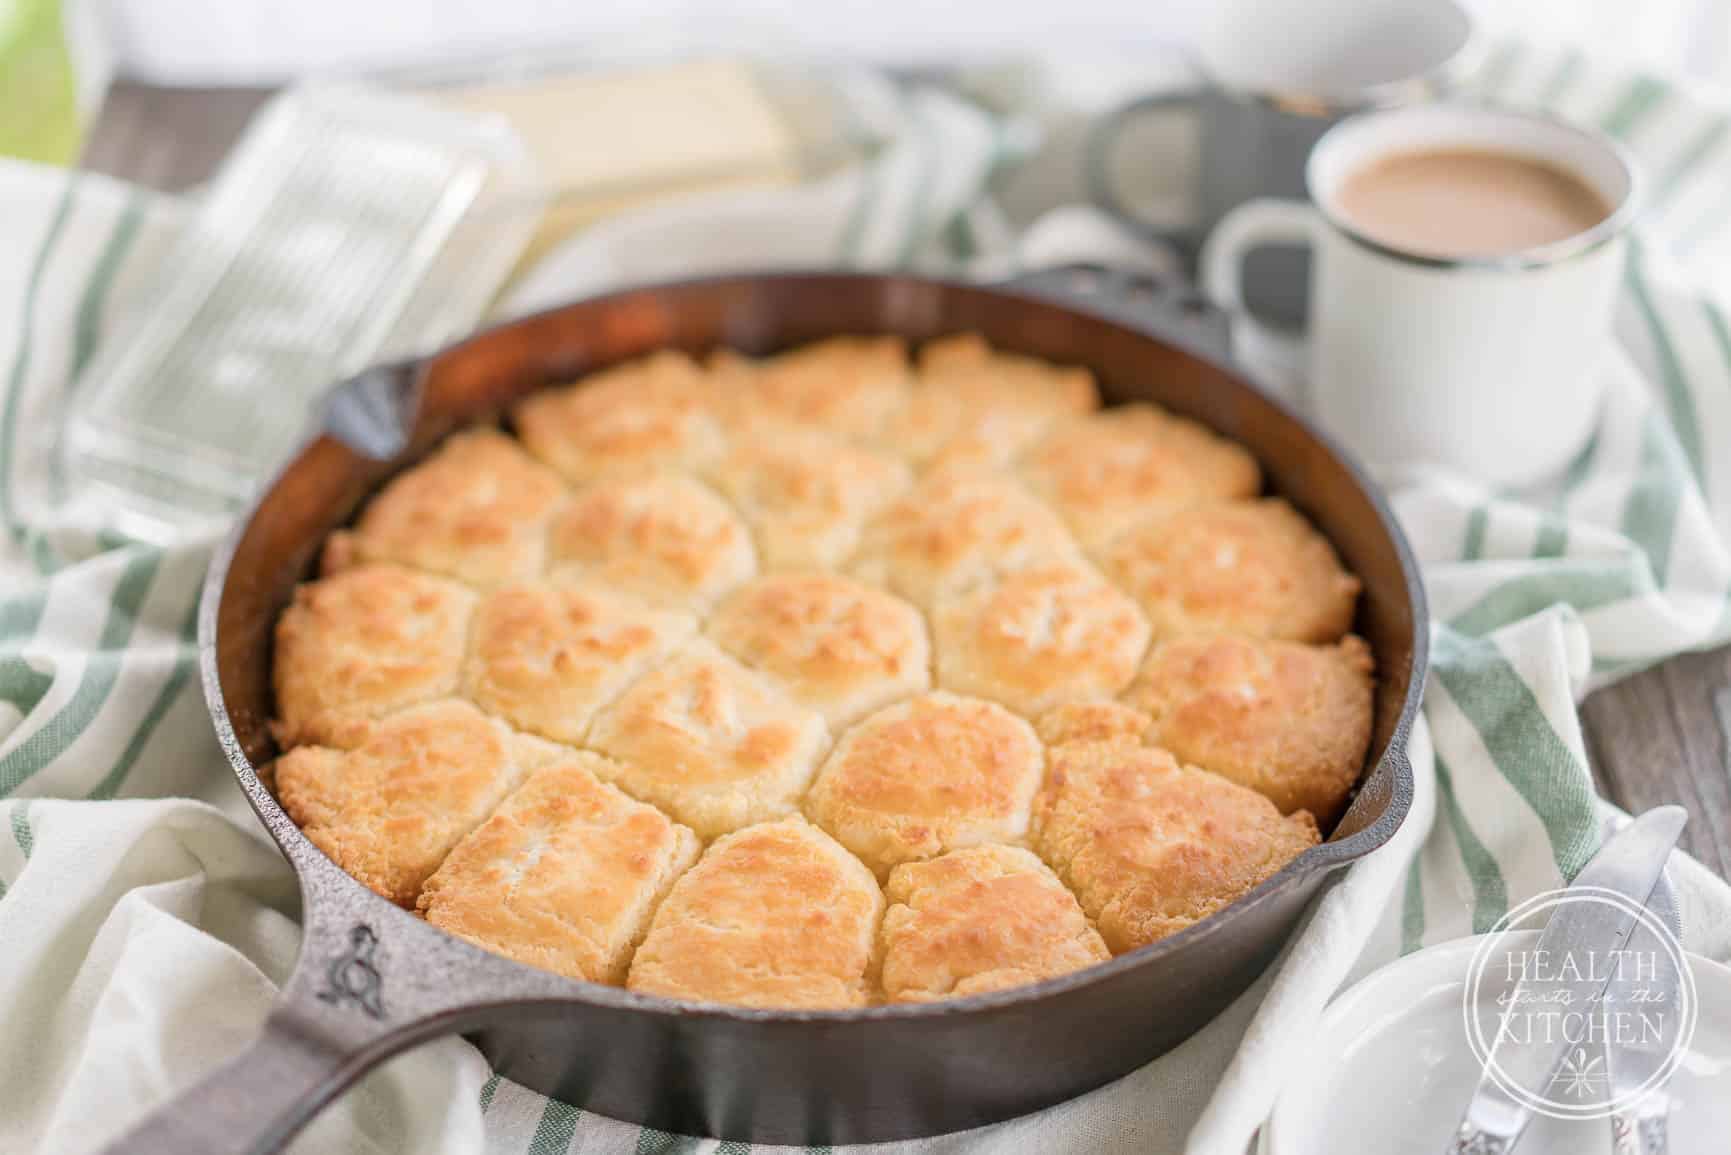 Southern Cast Iron Butter Drop Biscuits {Gluten-Free}